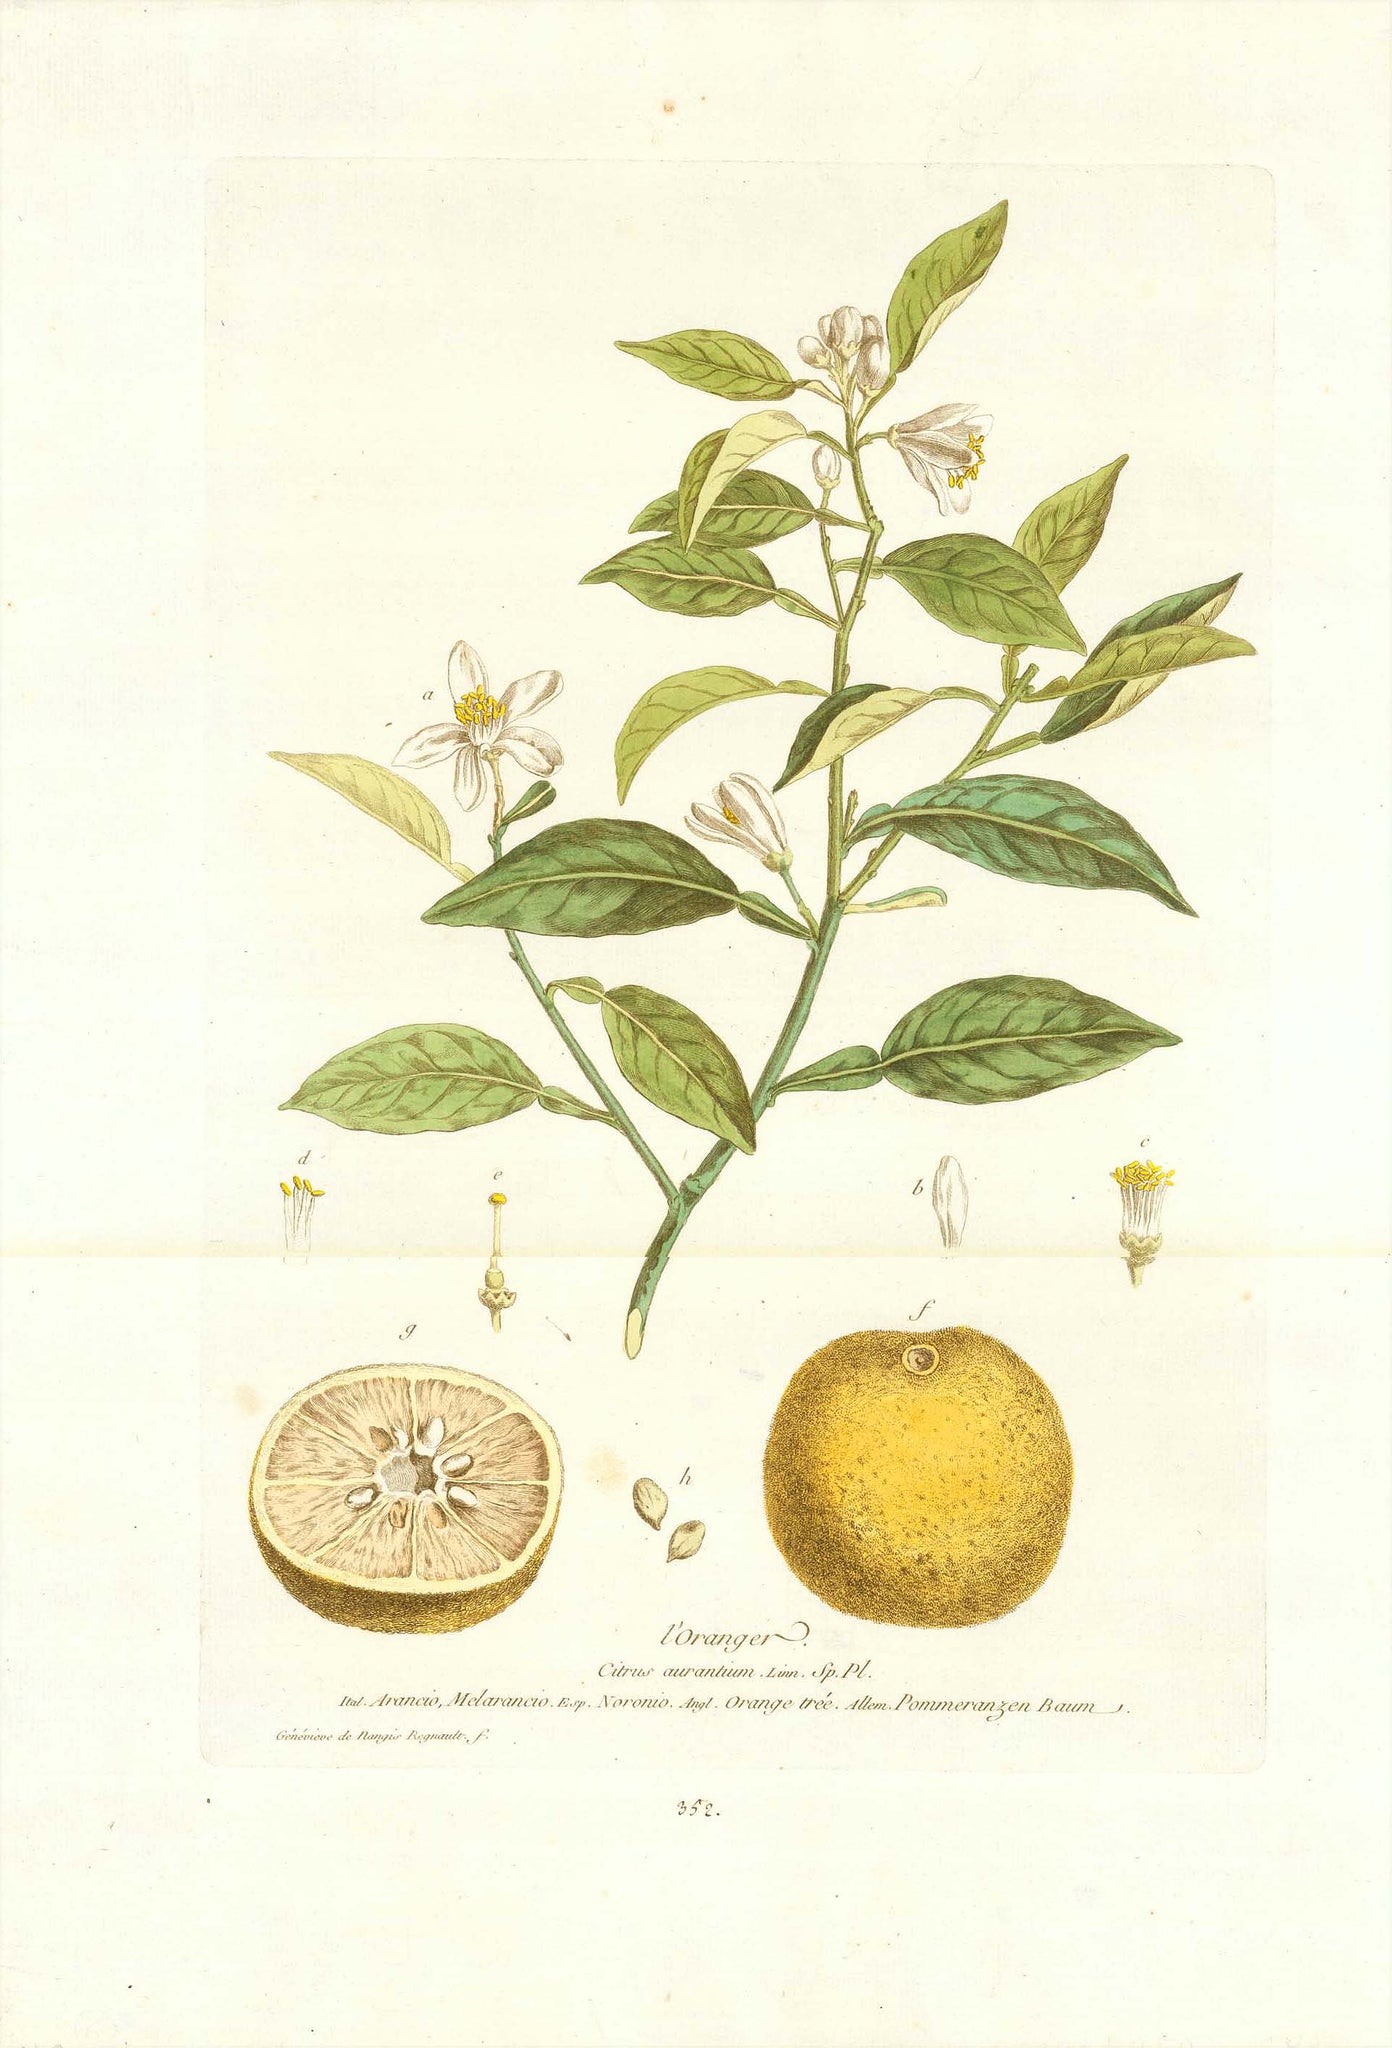 l'Oranger Citrus aurantium. Ital. Arancio, Melarancio, Esp. Noronio, Angl. Orange tree, Allem. Pommeranzen Baum.  Decorative Botanicals by N. Regnault  Browsing the world in search of rare as well as decorative antique prints, prints one does not see every day, prints which are not to be found easily in most antique print shops, we came upon this very delightful, highly decorative and botanically 